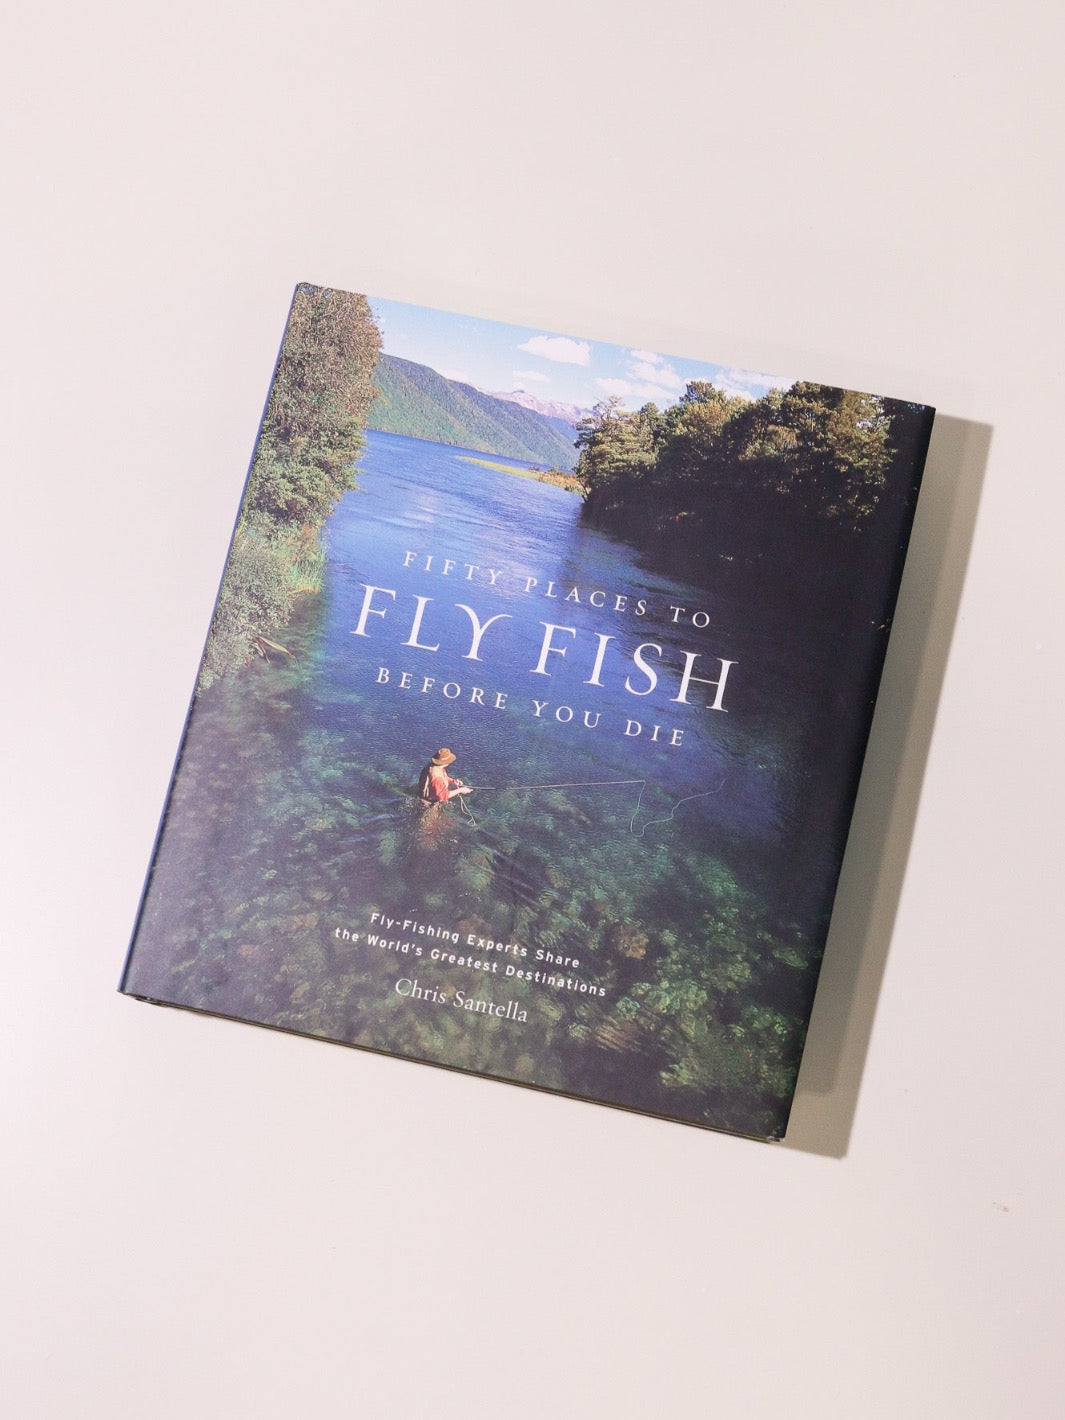 50 Places to Fly Fish Before You Die - Heyday